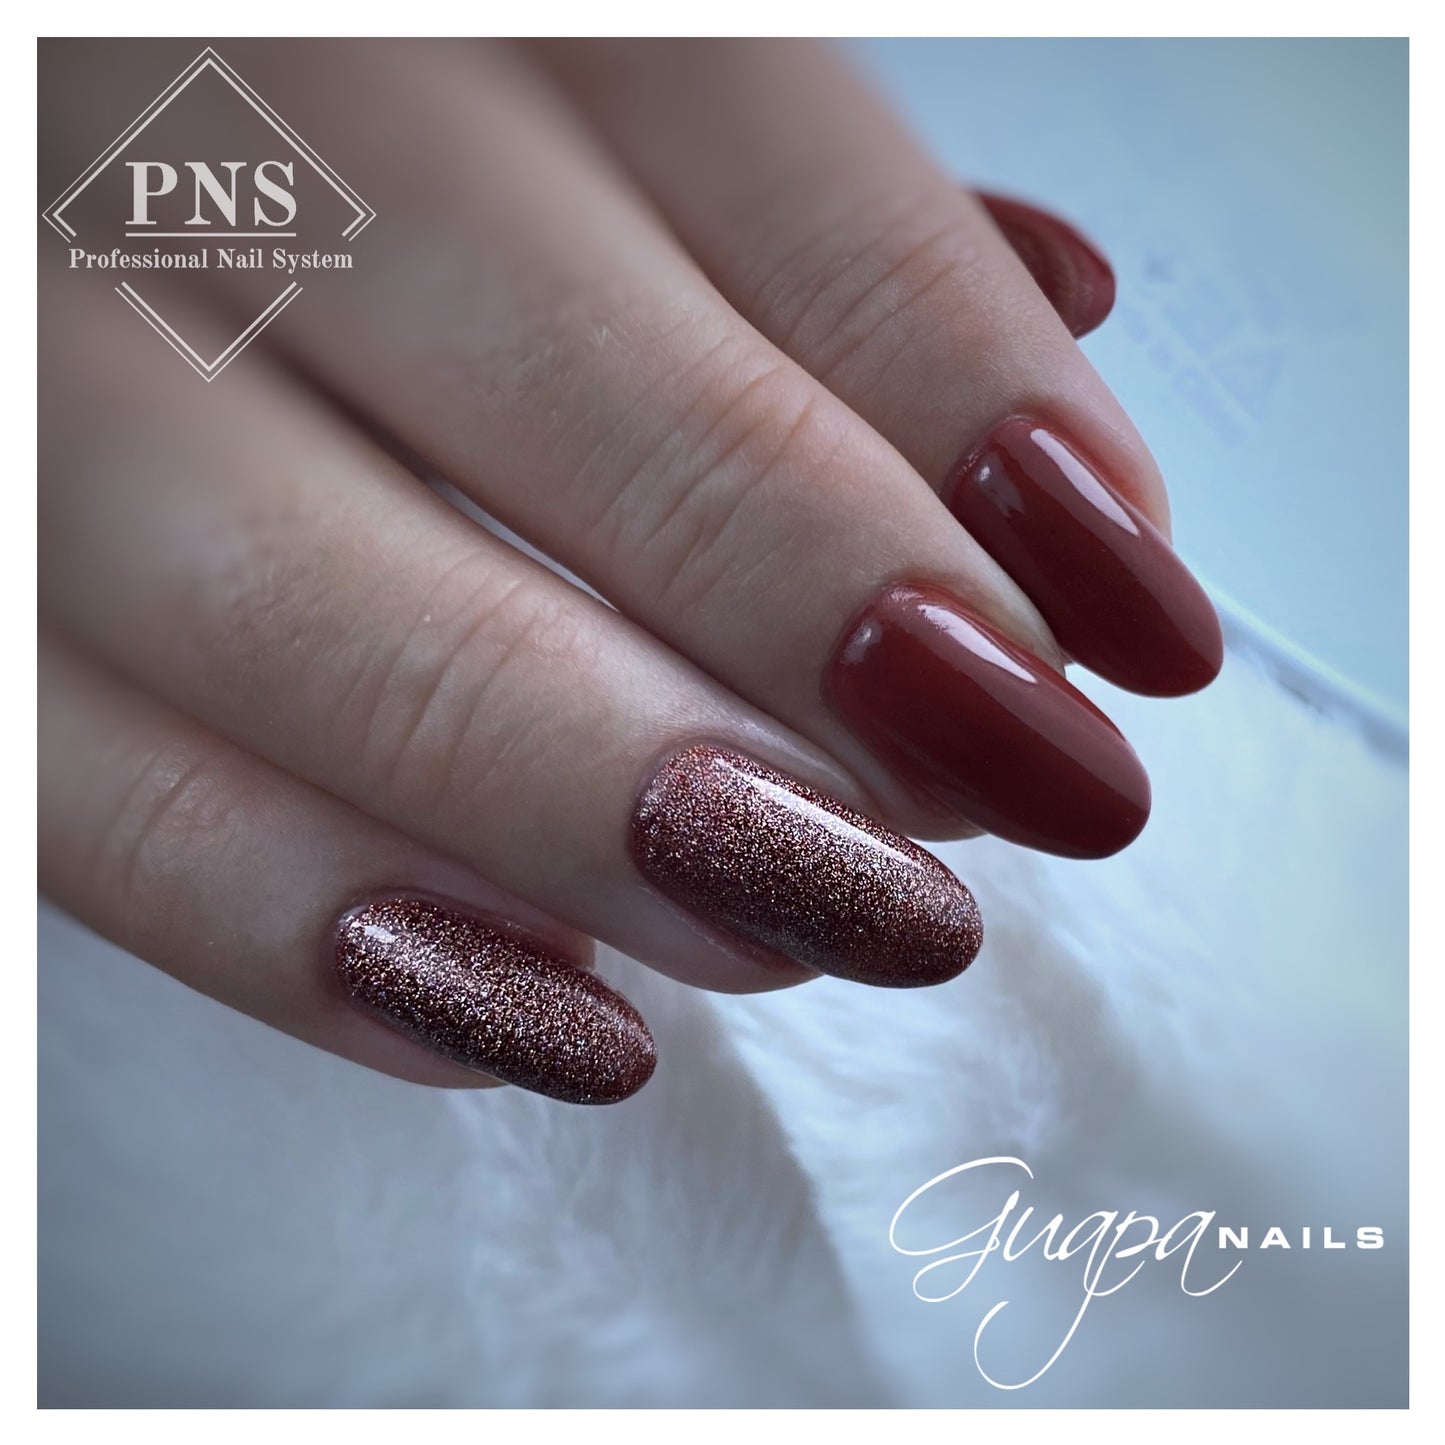 PNS My Little Polish Spice (Xarpo collection)